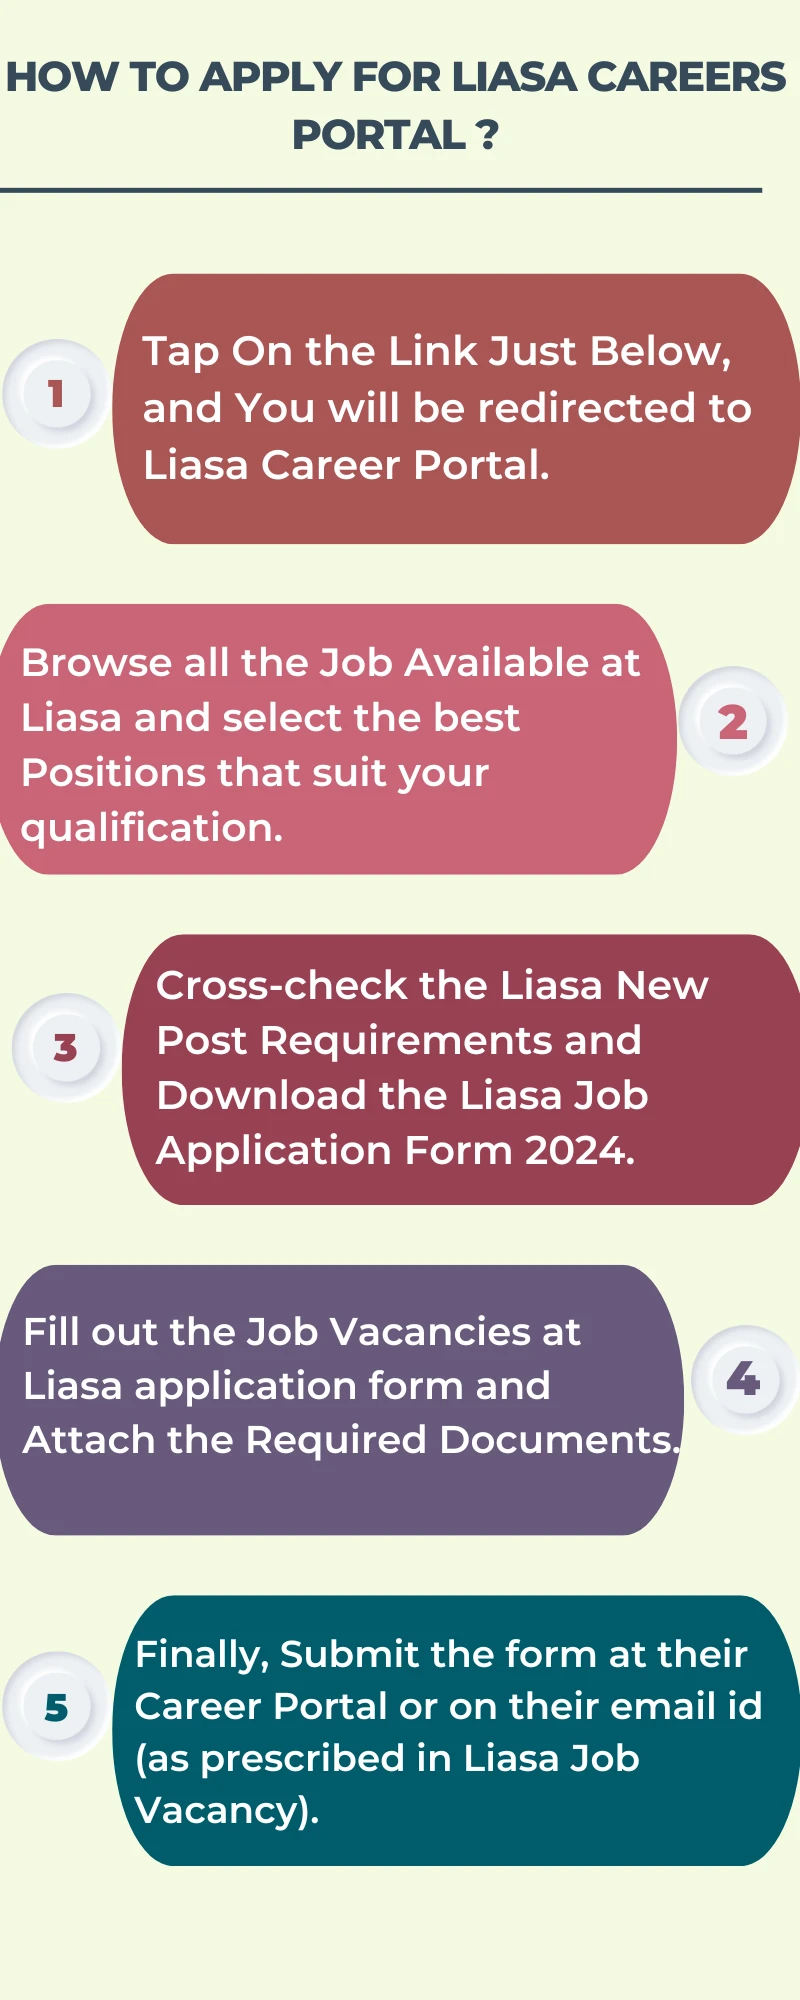 How To Apply for Liasa Careers Portal ?